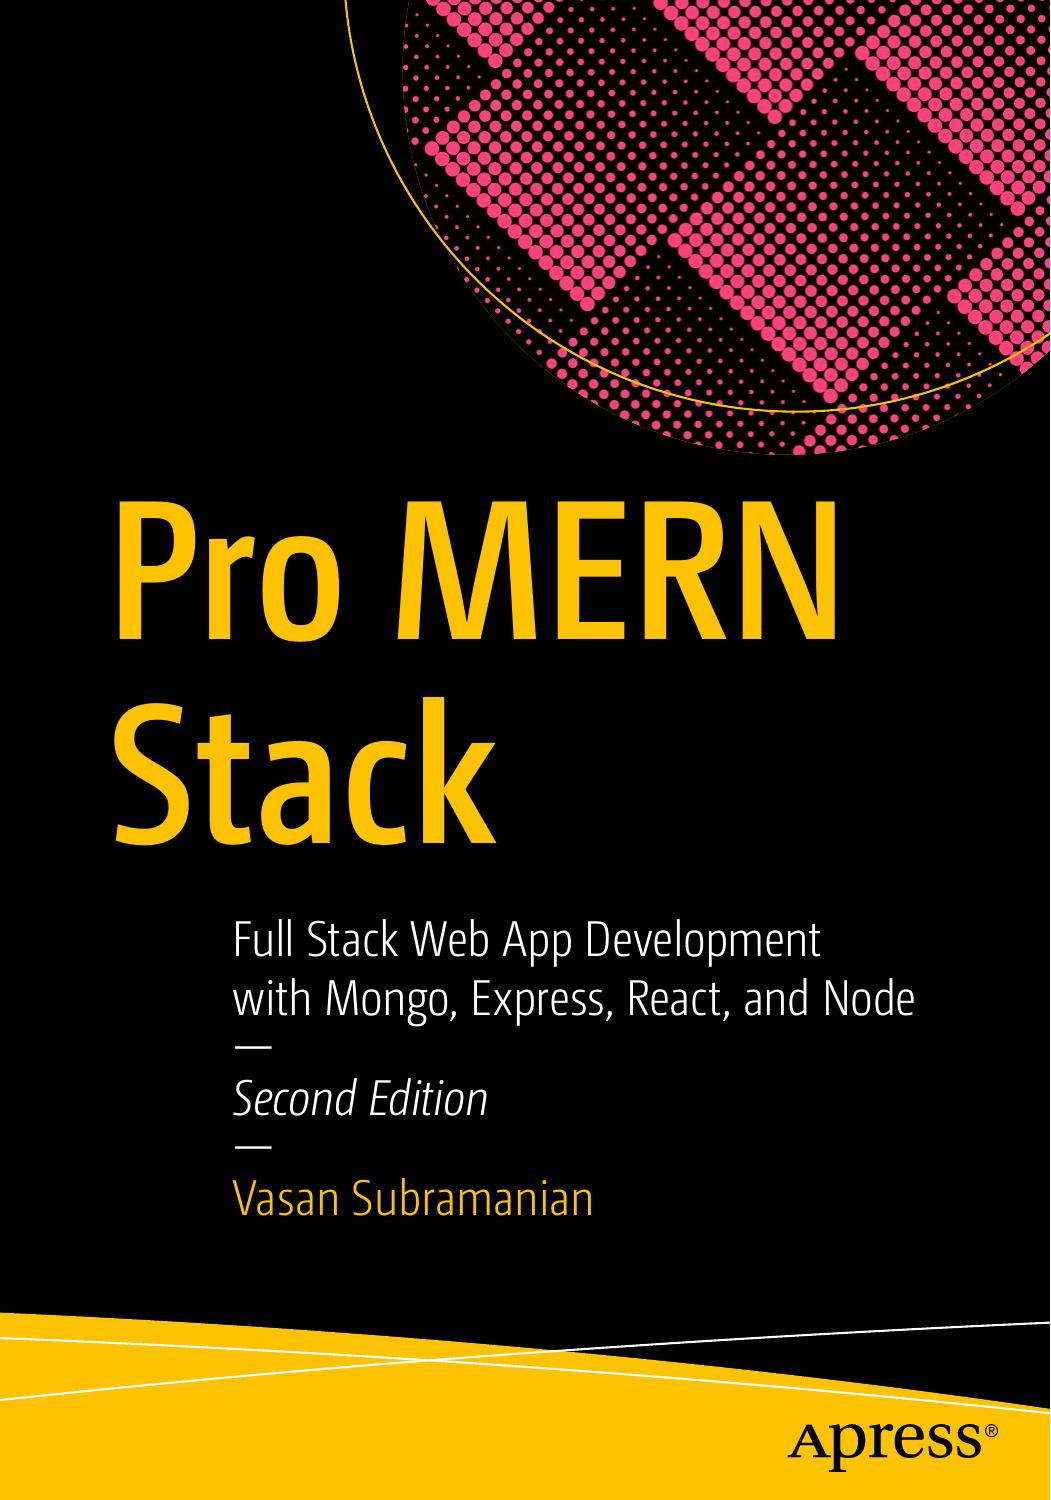 Pro MERN Stack: Full Stack Web App Development with Mongo, Express, React, and Node